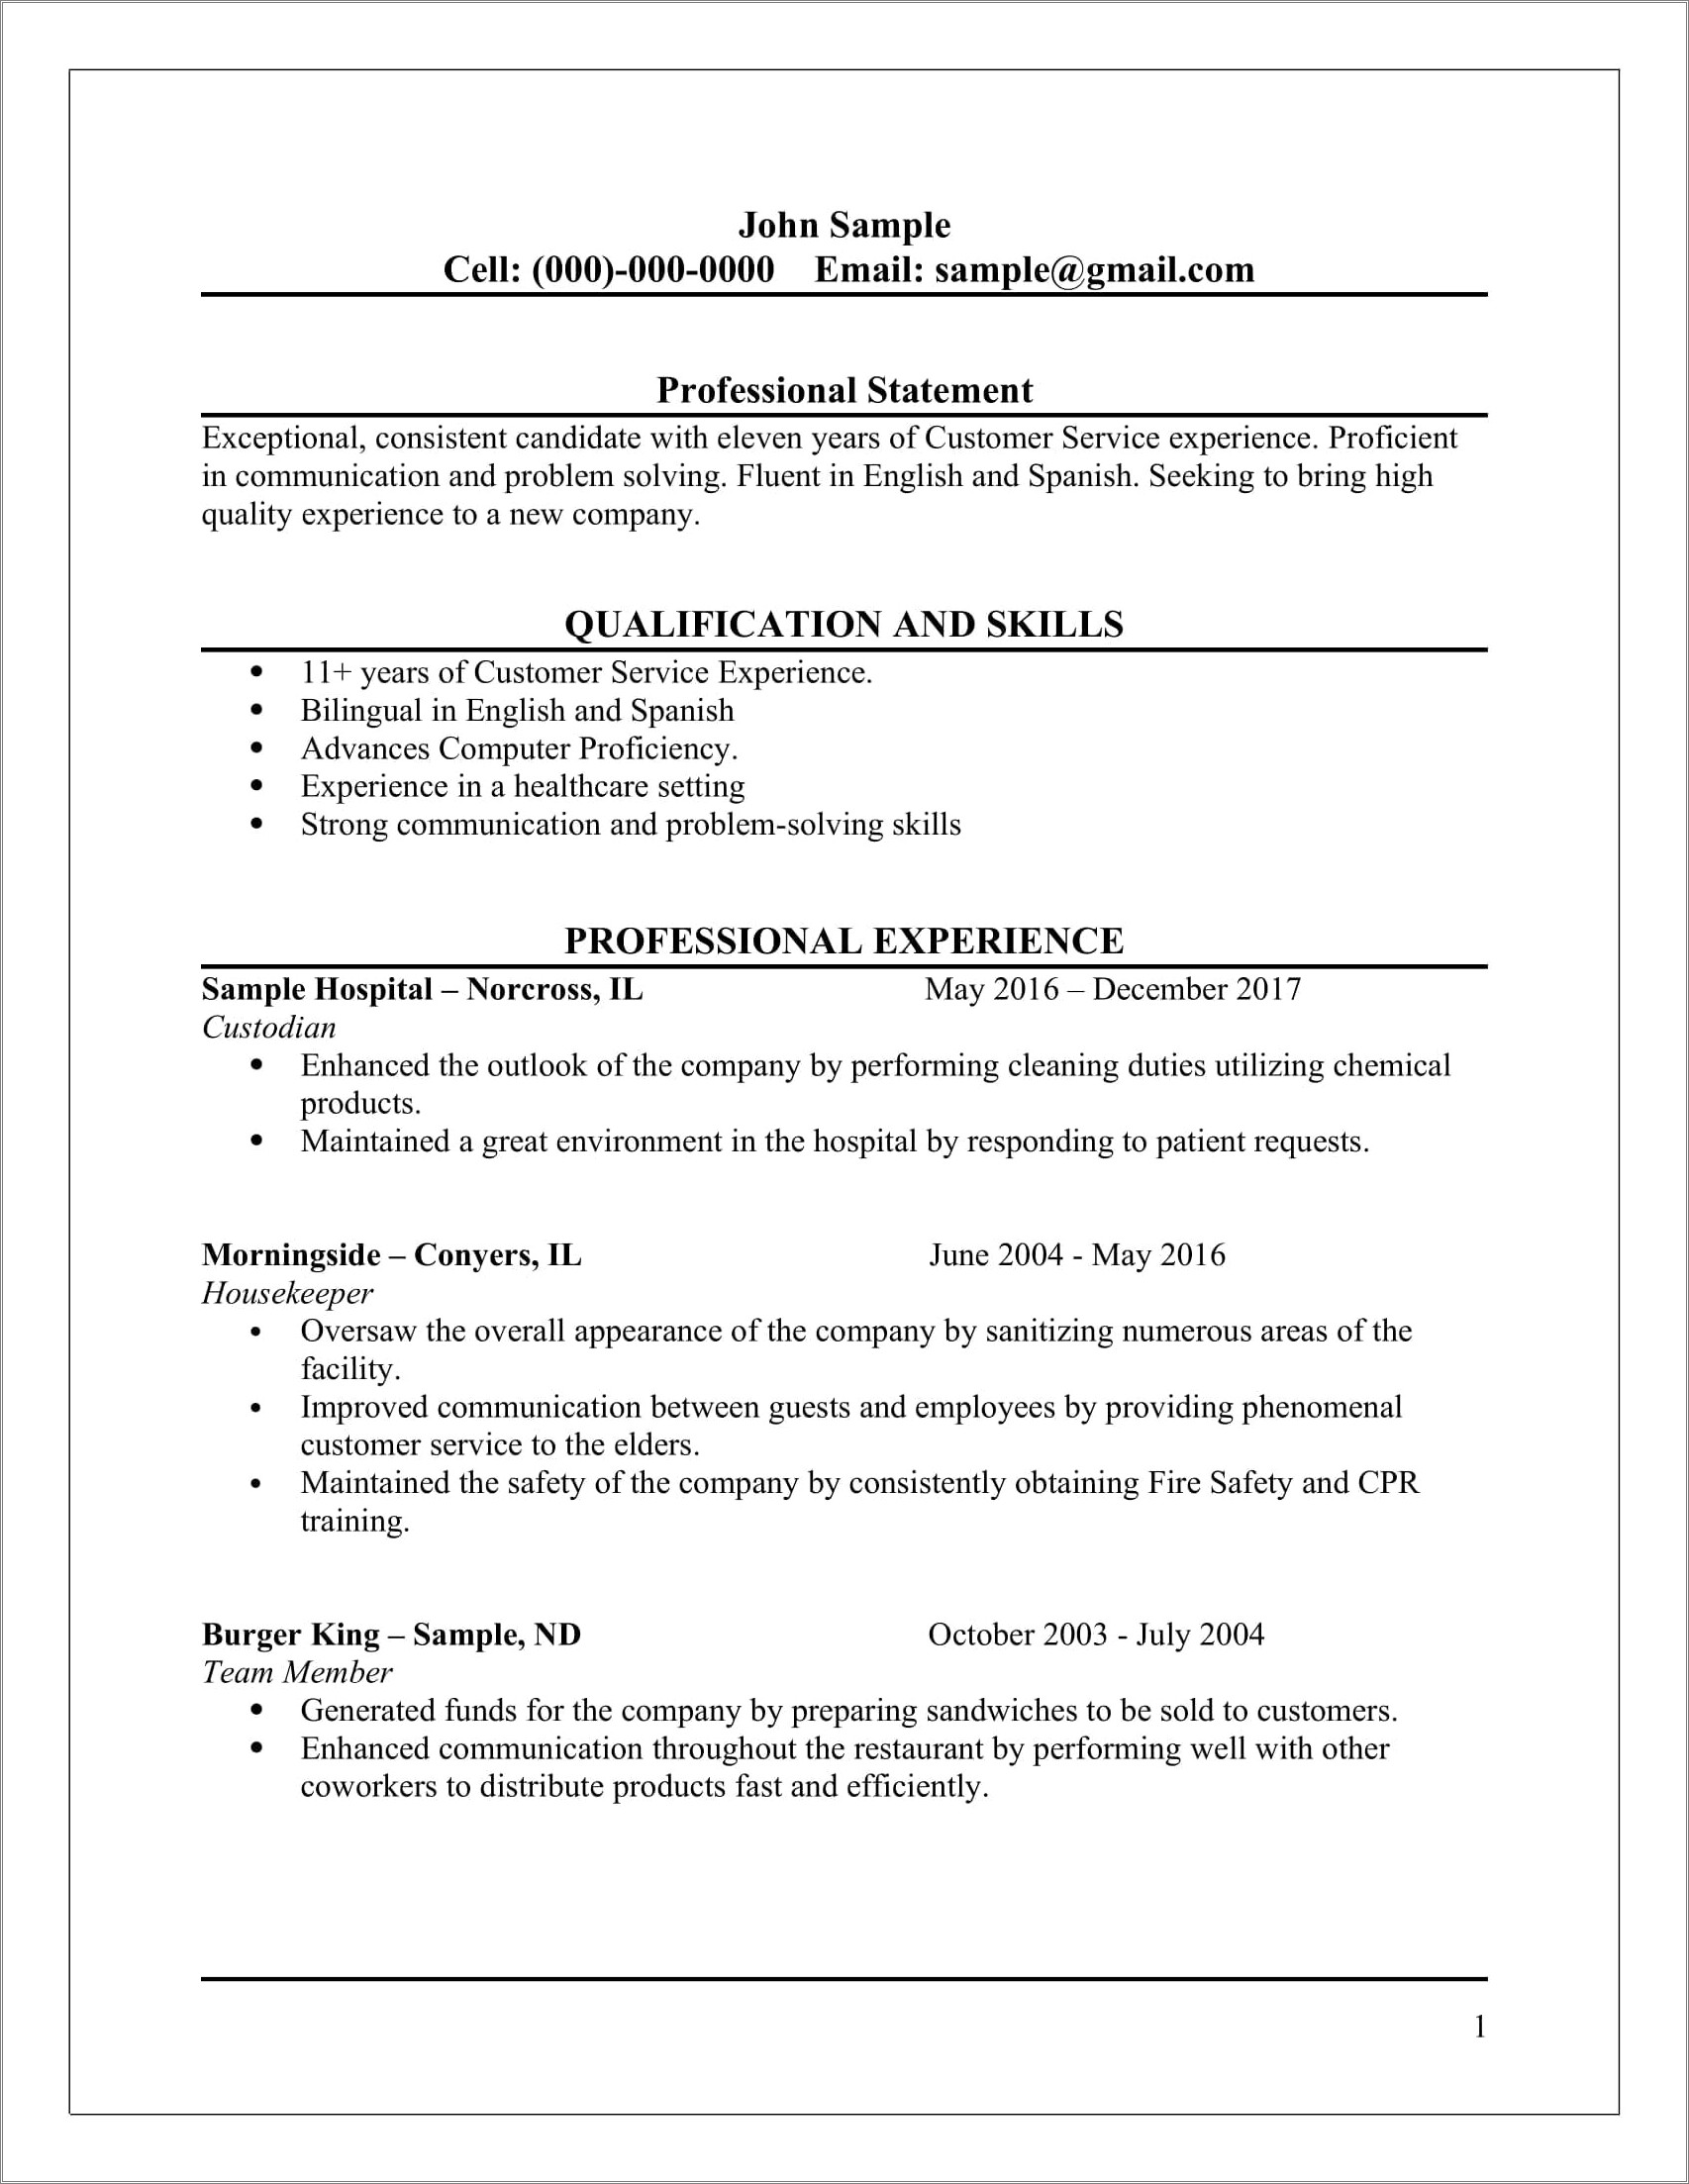 Resume Cover Letter For Kroger Company Examples